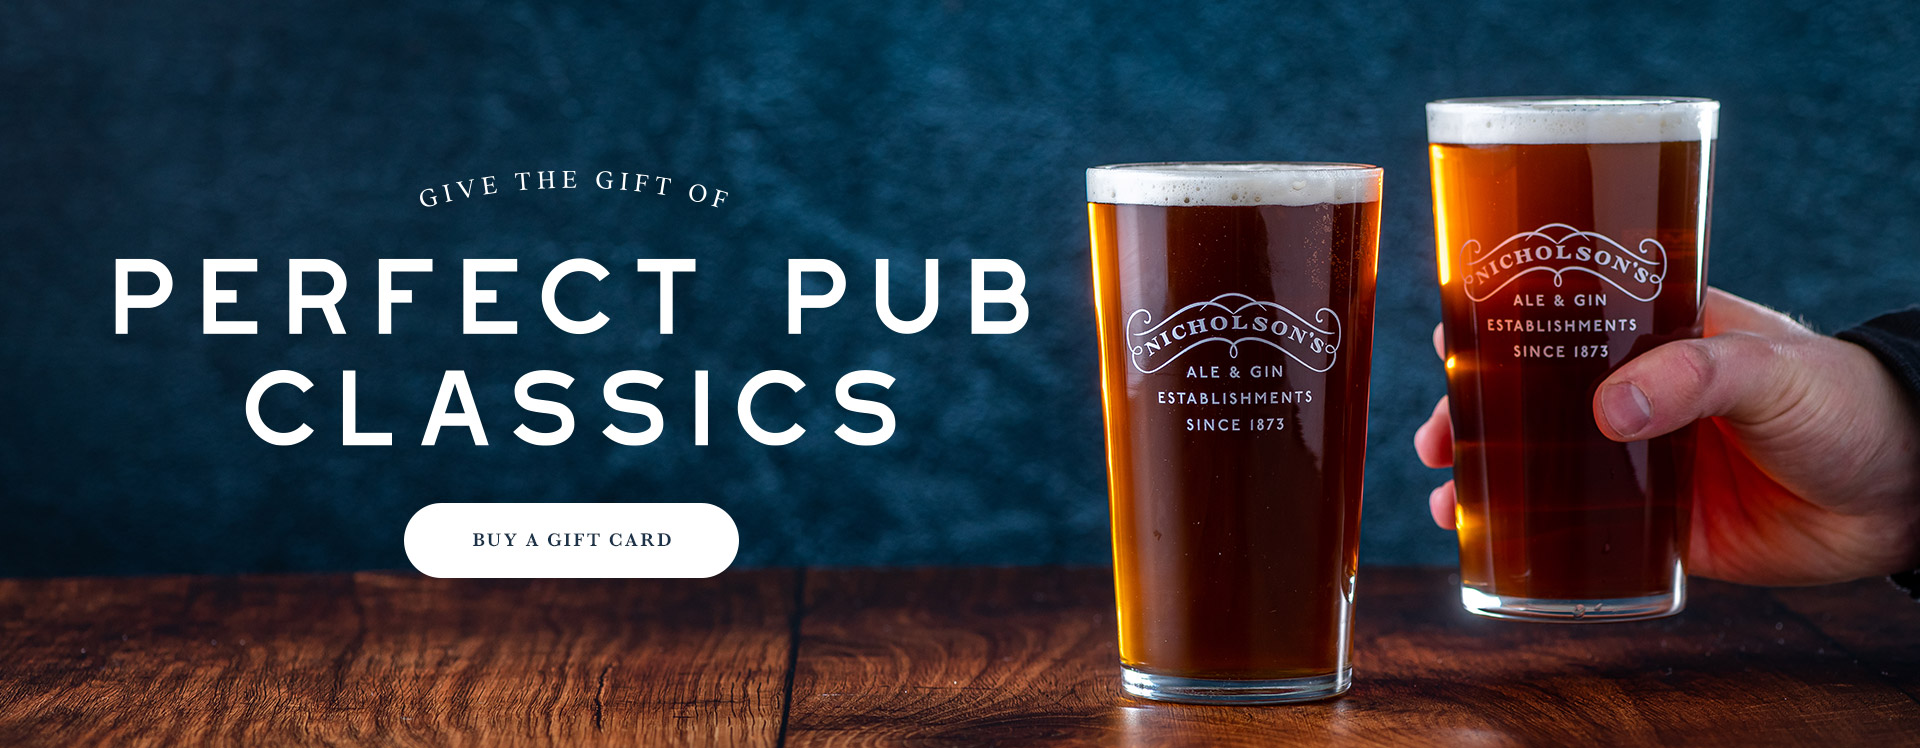 Nicholson’s Pub Gift Voucher at The Green Man in London